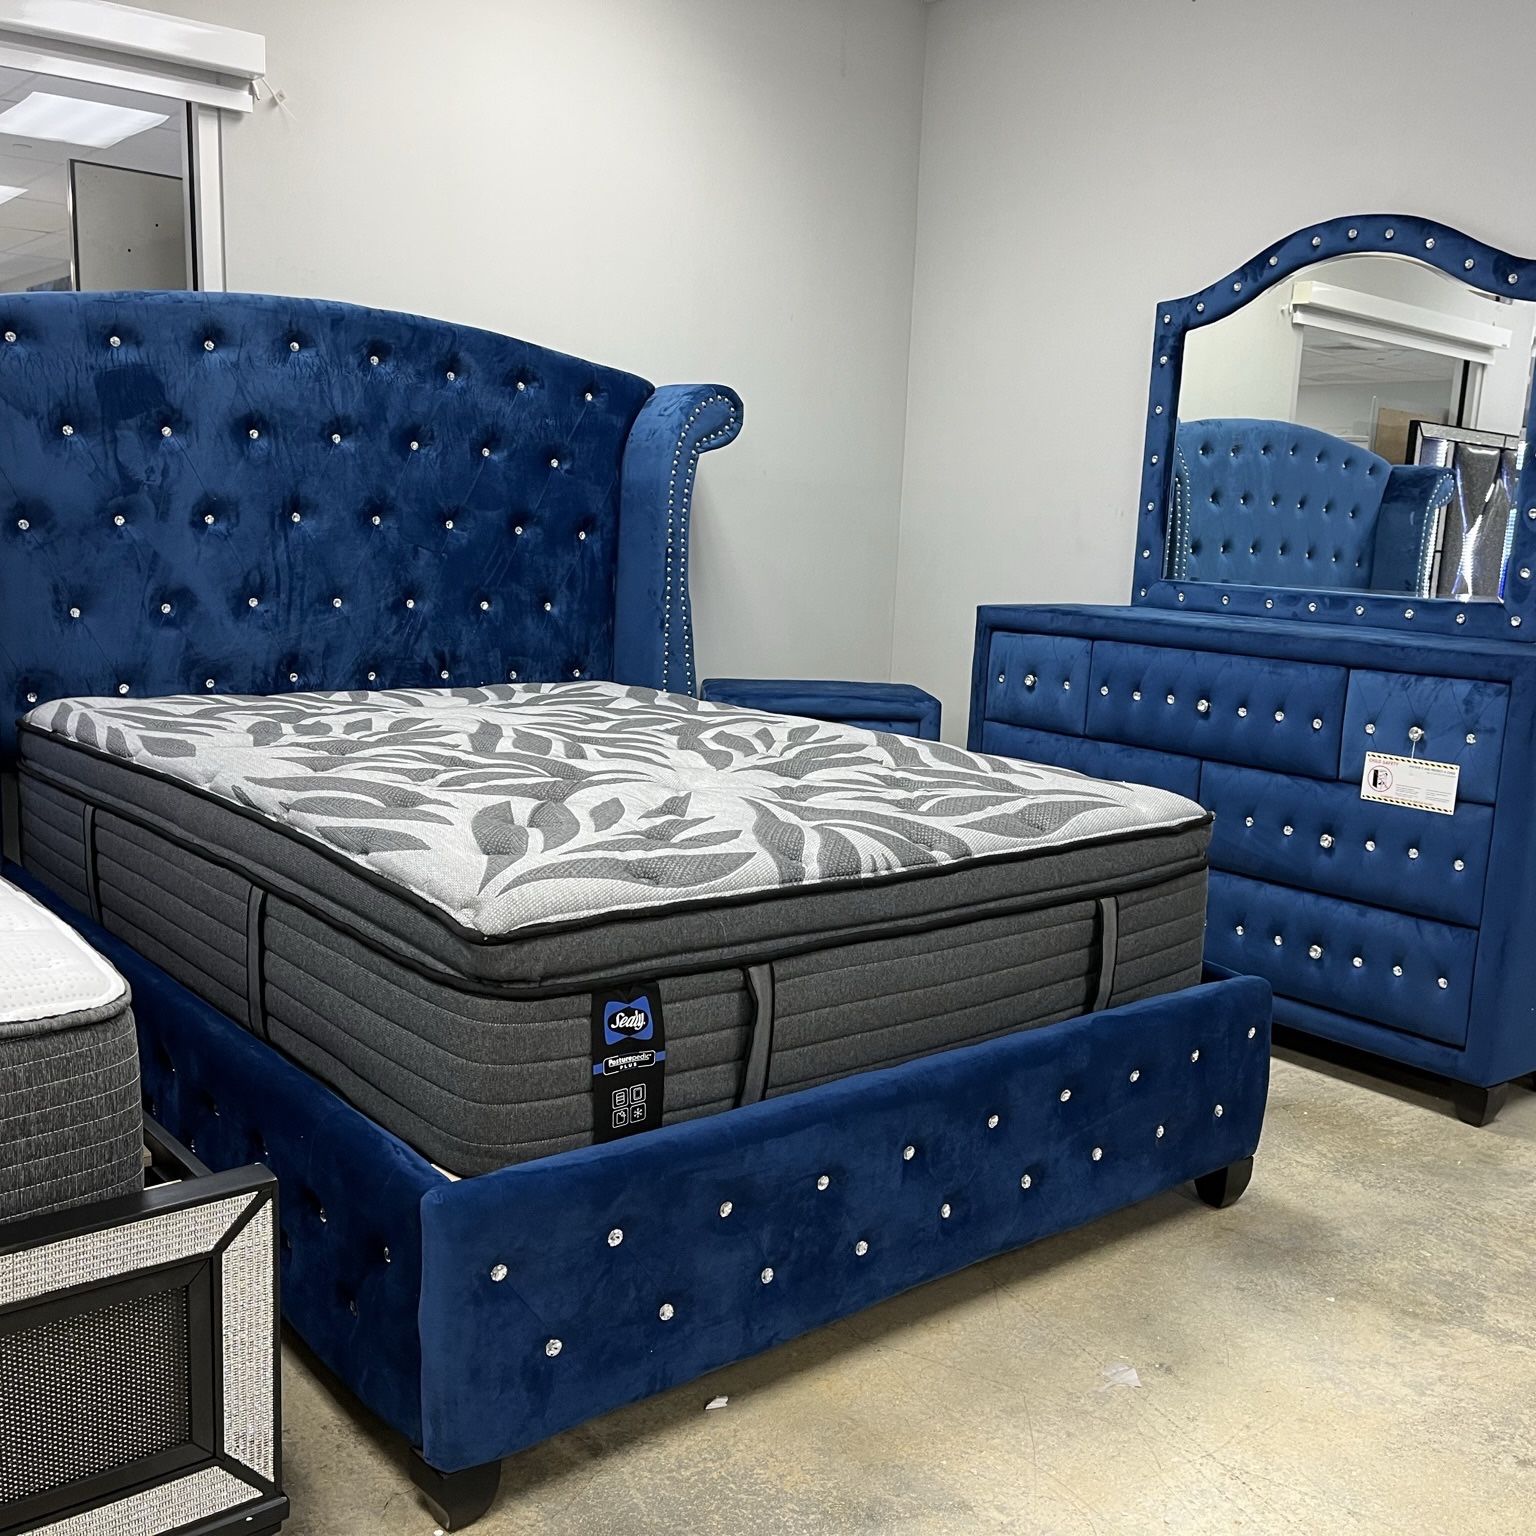 🤩🤩🤩🤩 Huge Liquidation Sale On Bedroom Sets, Living Room Sets And Dining Set 📍 Everything Marked Down 50% To 80% Off 🔥🔥 Sale Ends Monday 